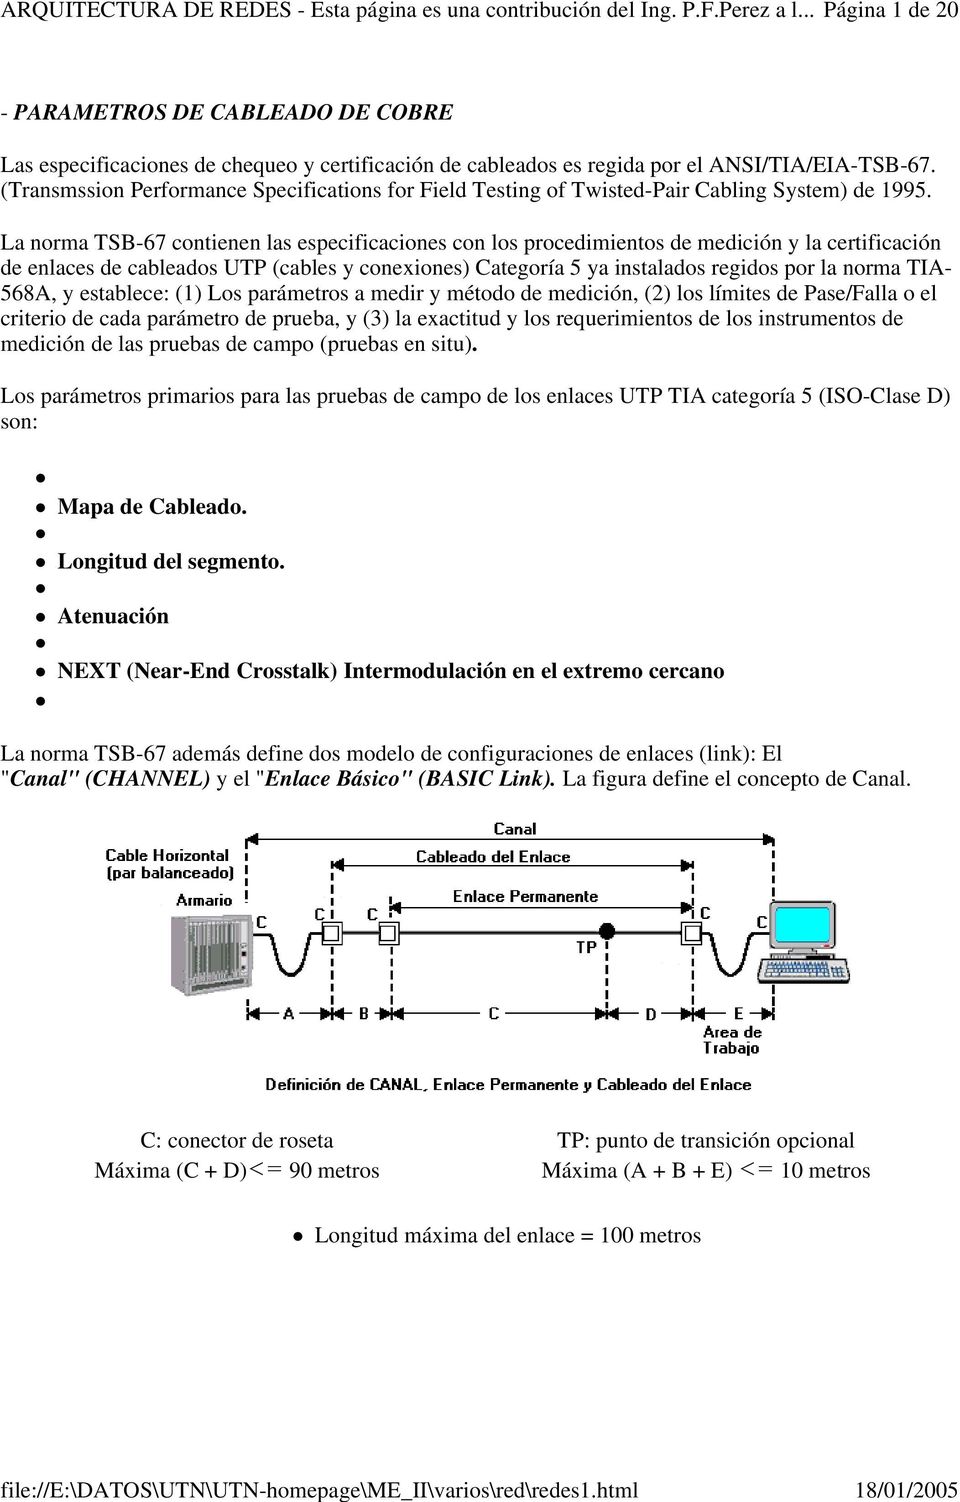 (Transmssion Performance Specifications for Field Testing of Twisted-Pair Cabling System) de 1995.